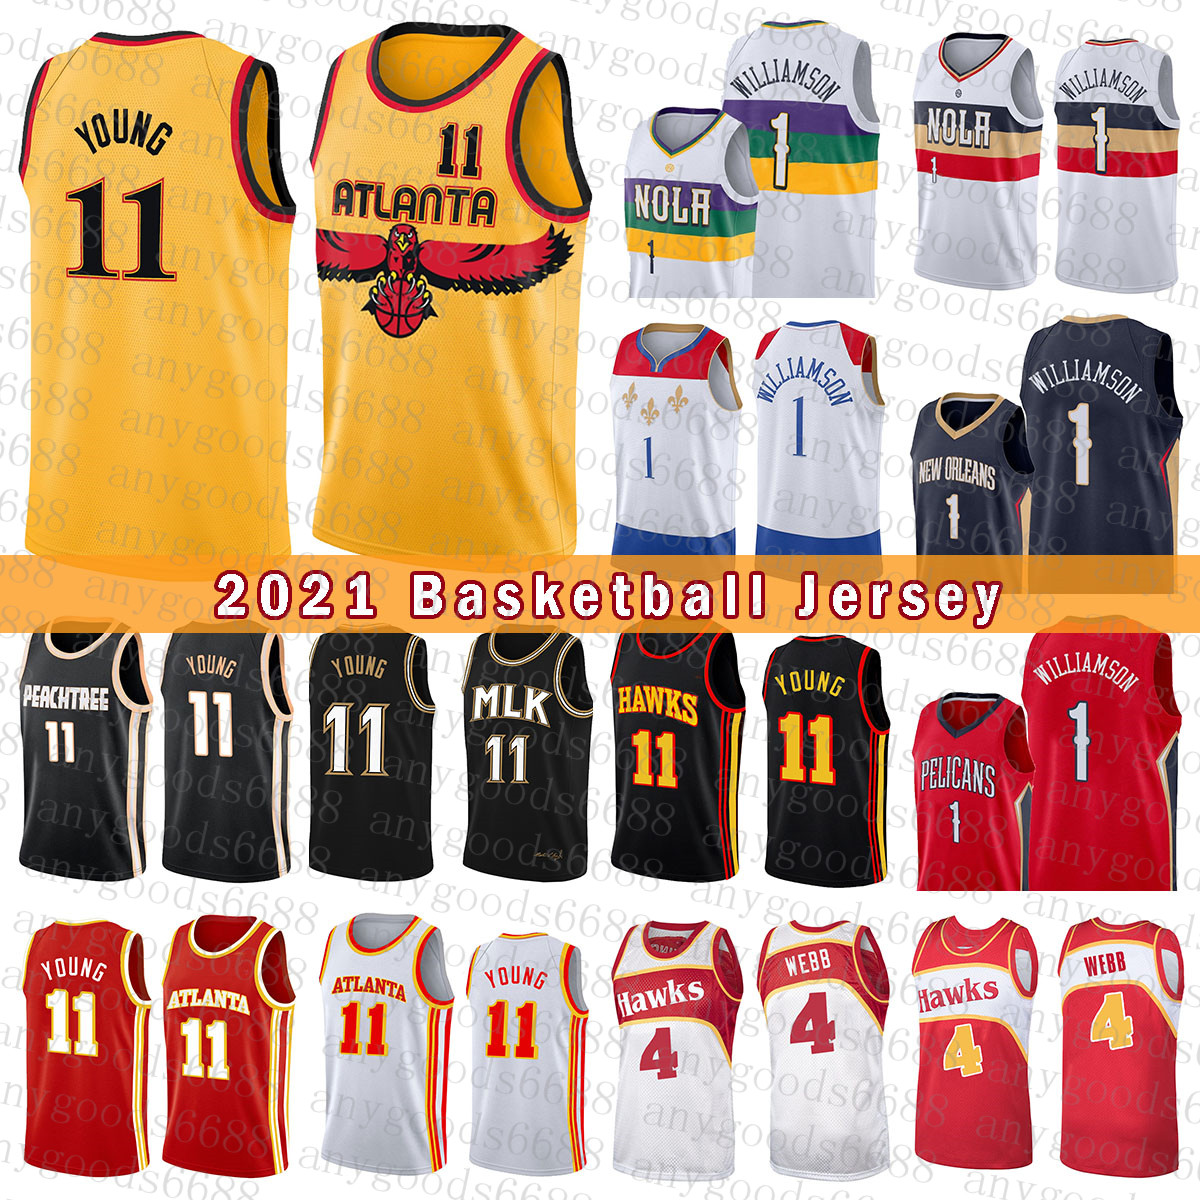 

New Mens Orleans Atlantas Hawk Pelican Basketball Jersey S-2XL Zion 1 Williamson Trae 11 Young Spud 4 Webb Ivory White